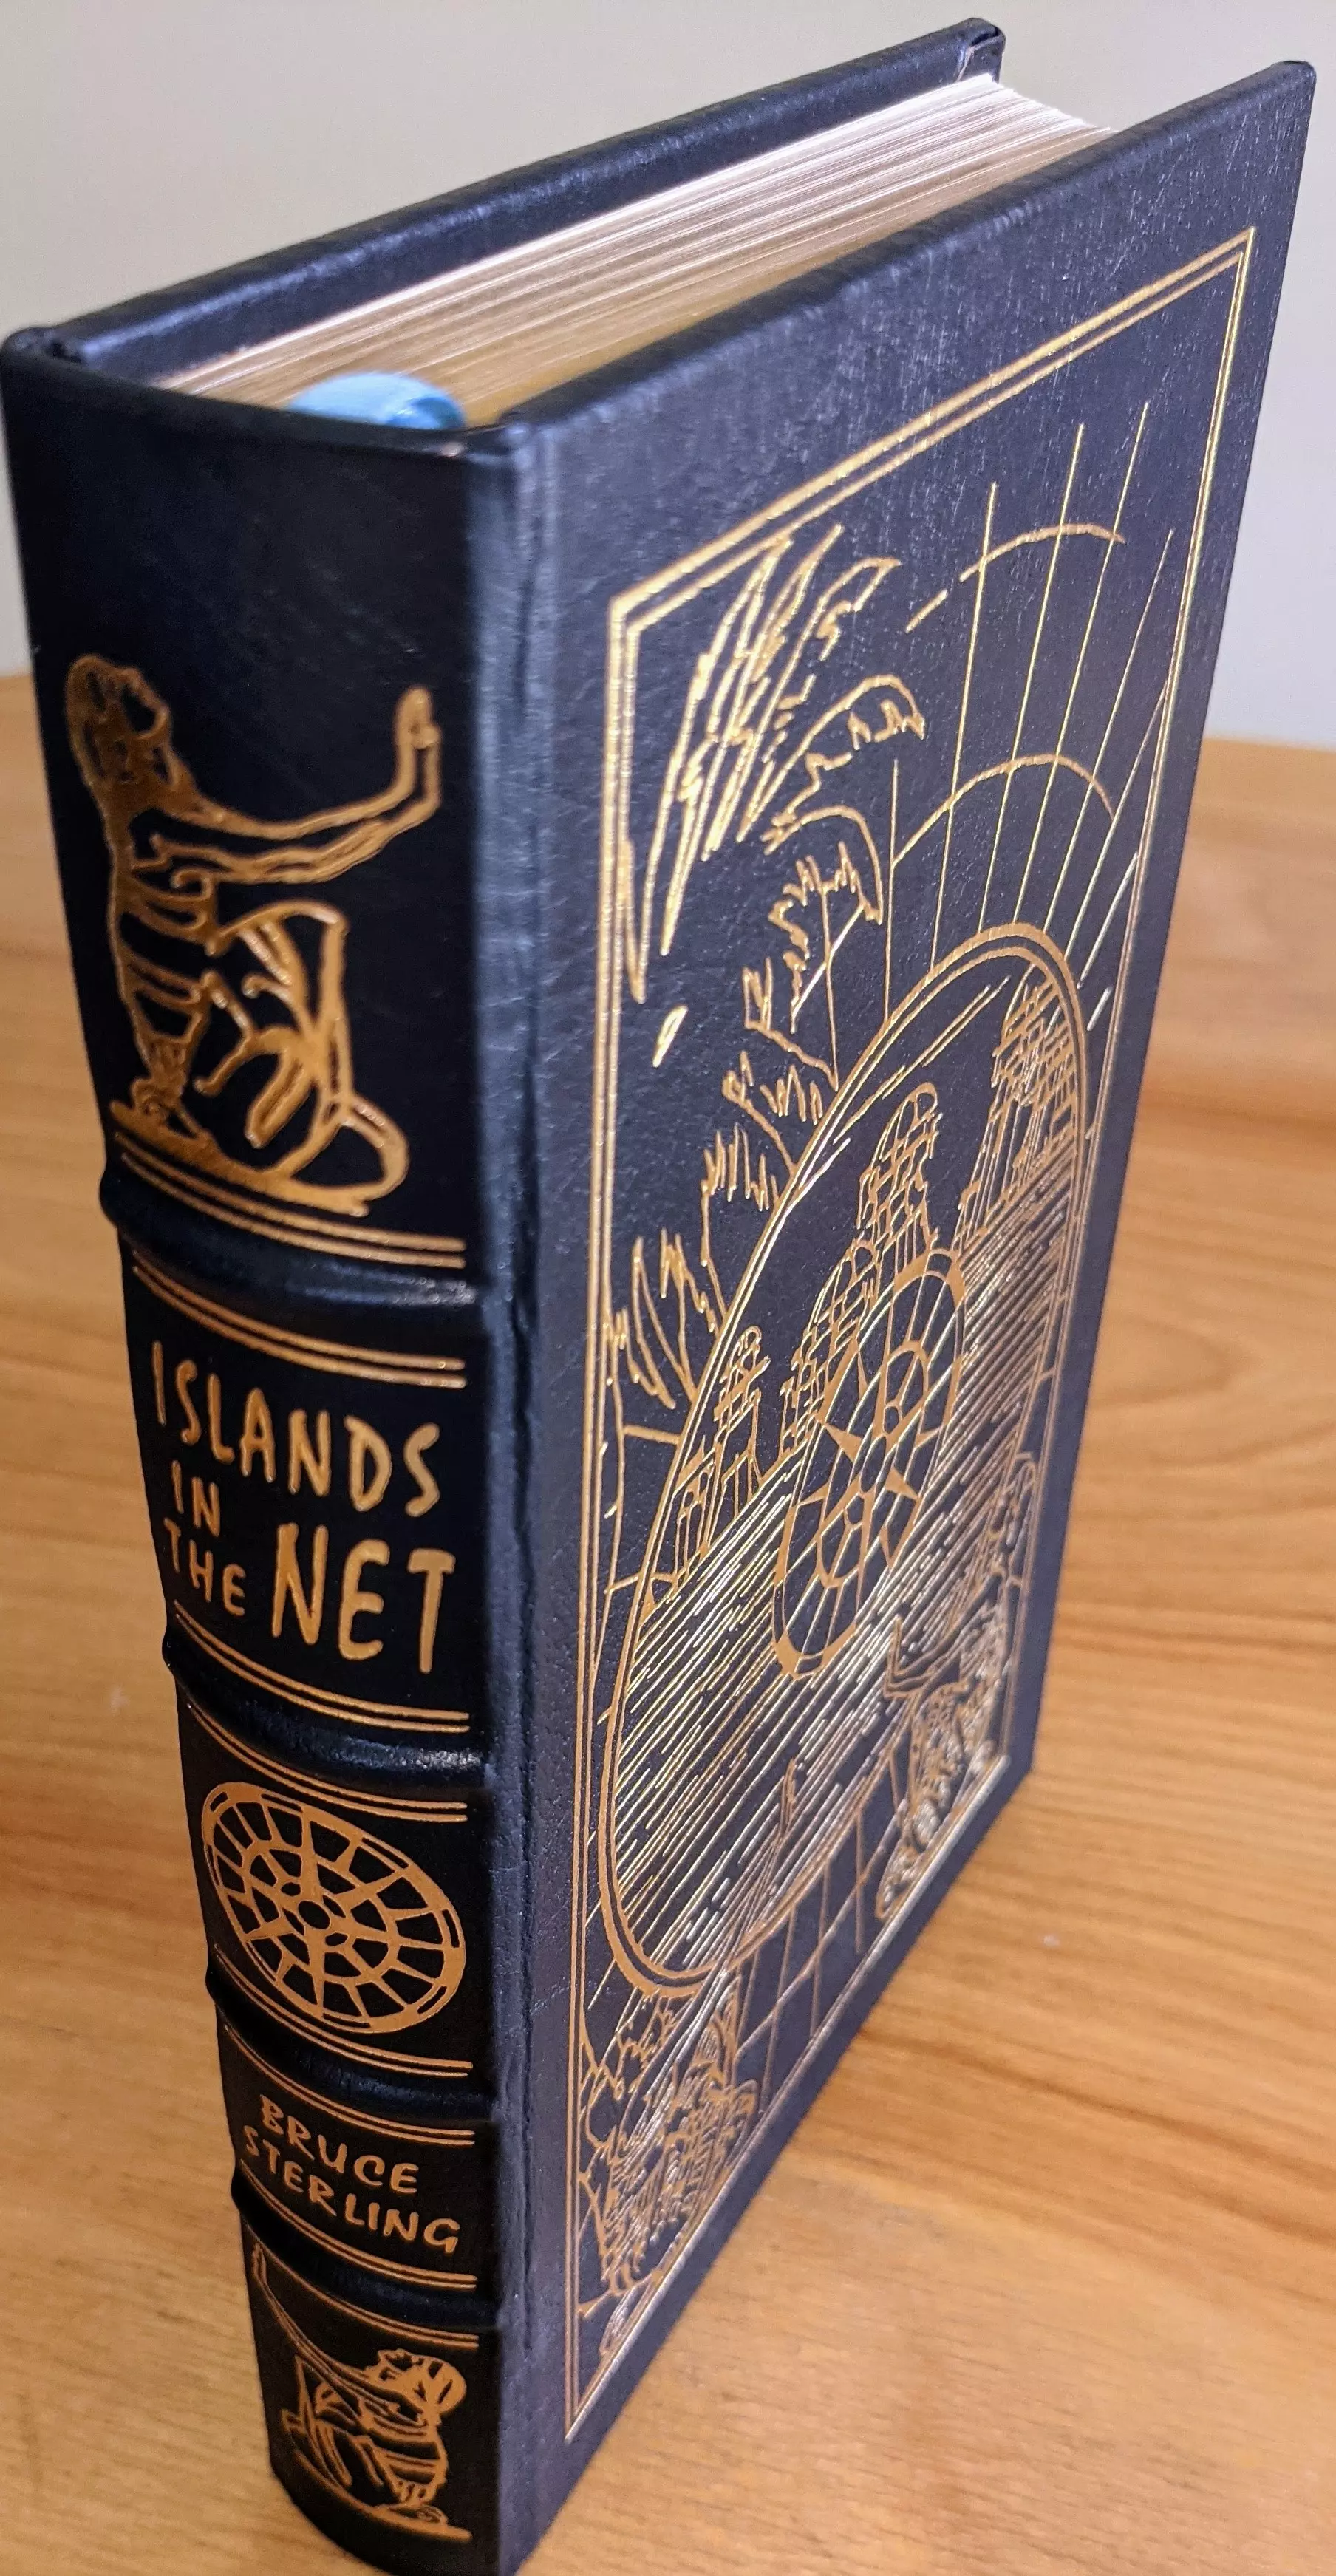 Stunning Navy Blue Leather Bound hardback book with hubbed spine, cover artwork in 22kt gold, printed on archival paper with gold gilded edges, smyth sewing & concealed muslin joints
	  - original artwork by Kent Bash